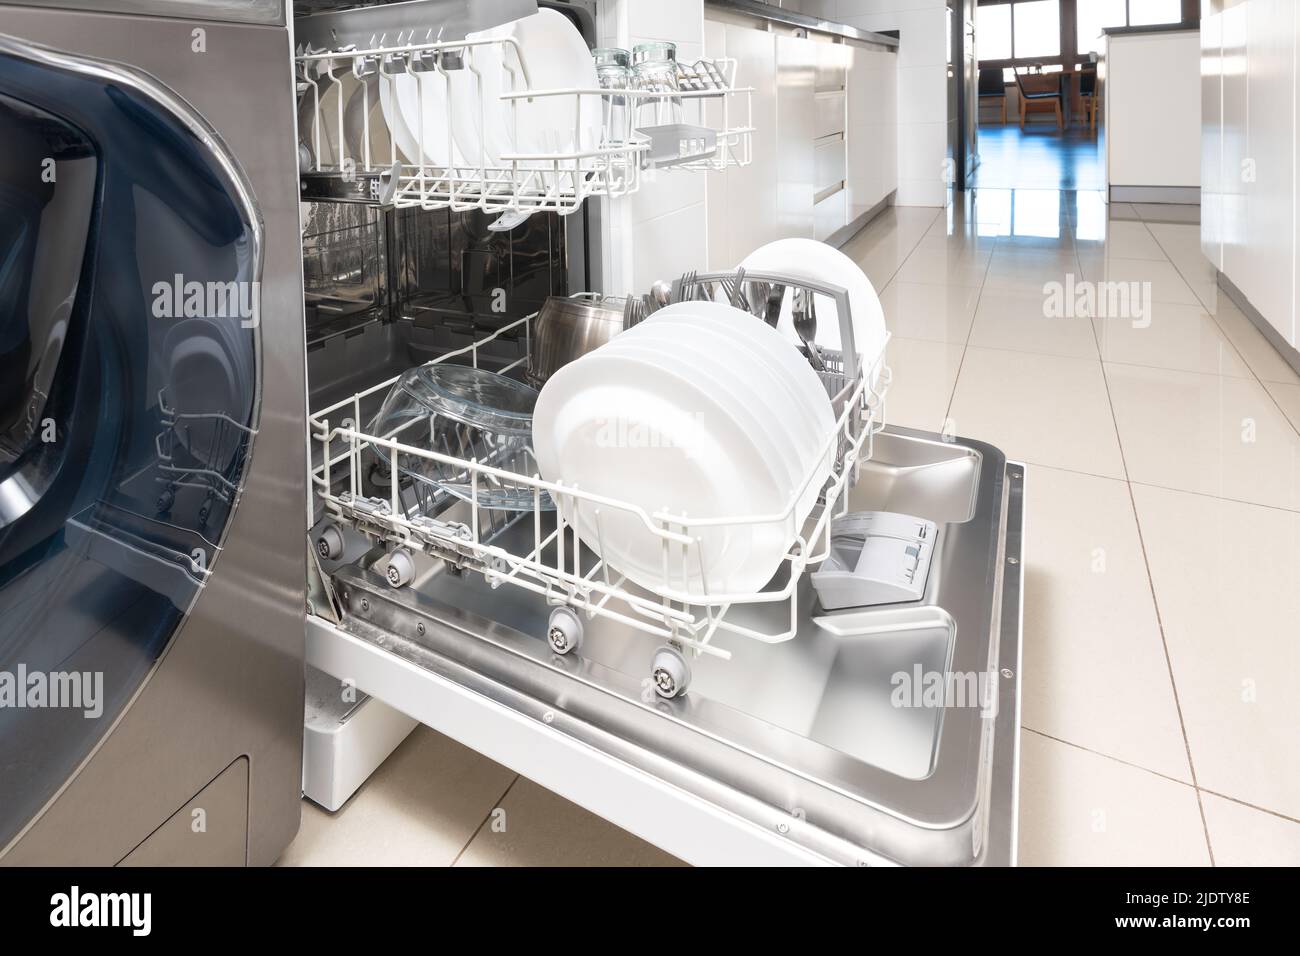 Open dishwasher with clean dishes in a modern kitchen Stock Photo